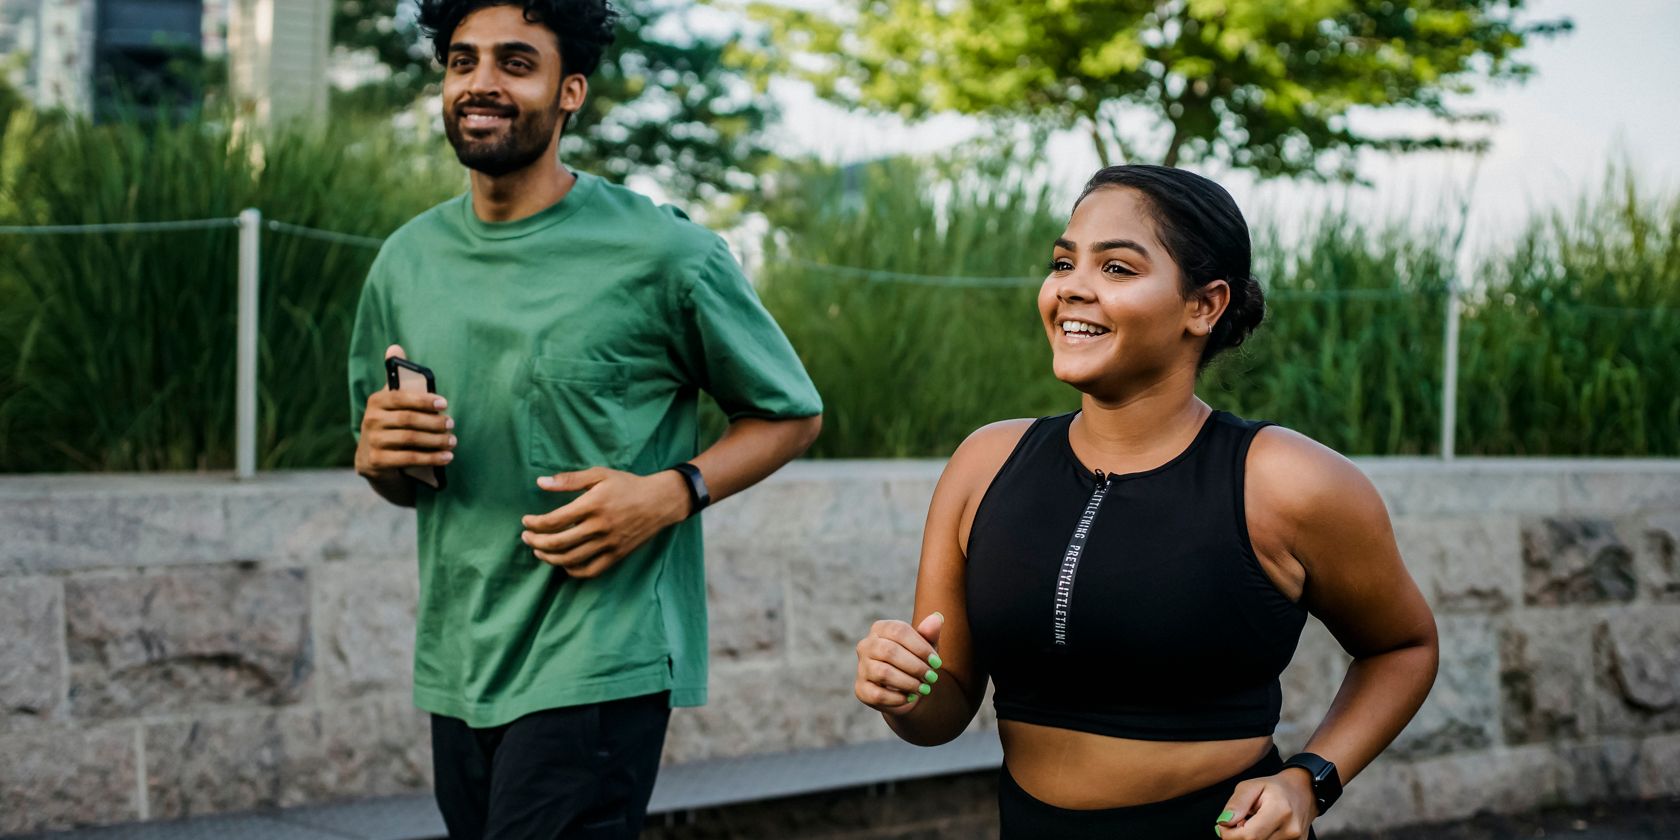 A happy man and woman jogging together wearing smart watches